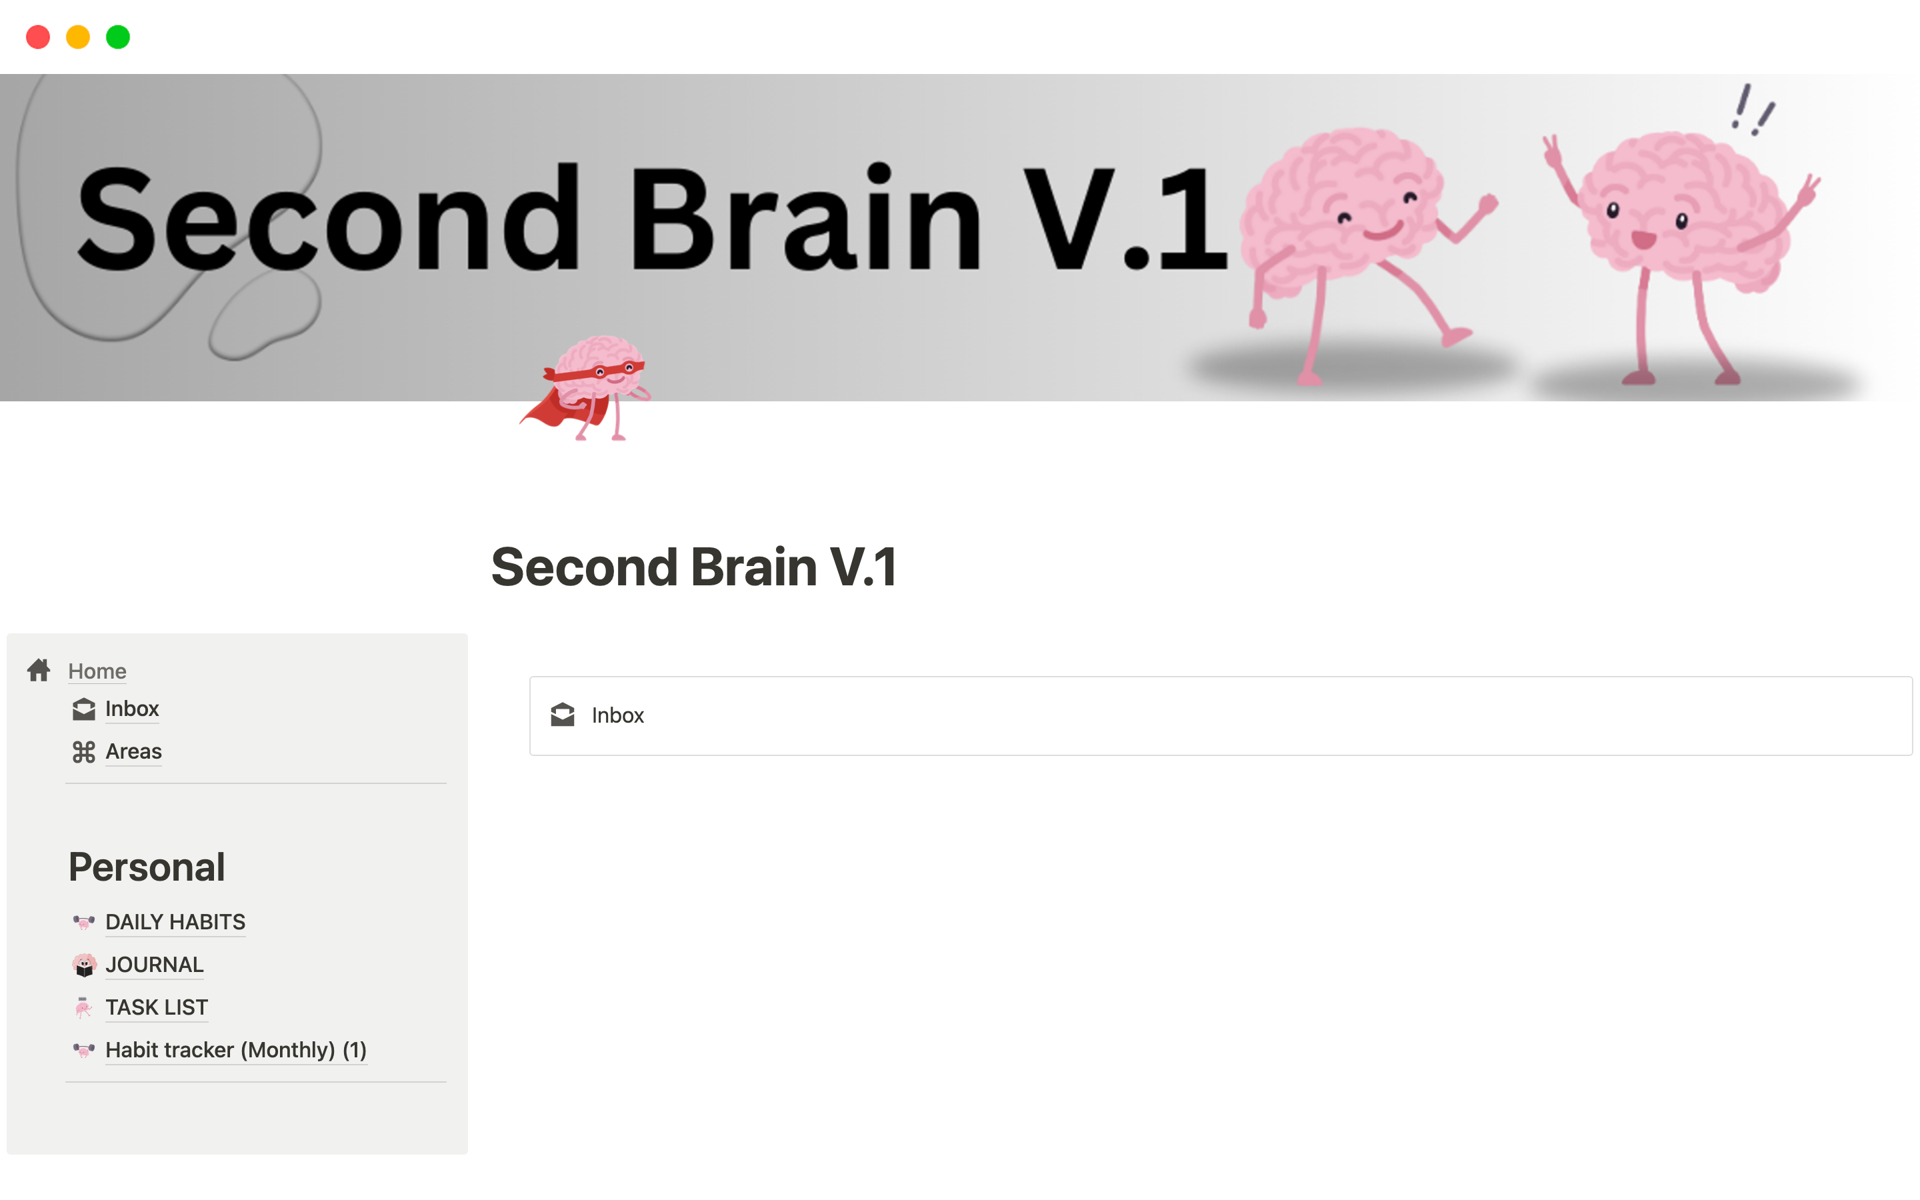 INTRODUCING: Second Brain V.1

Maximize your productivity and unlock your brain's full potential with The Ultimate Second Brain Template. Organize your thoughts, ideas, and information in one central location, making it easy to access and retrieve whenever you need it.